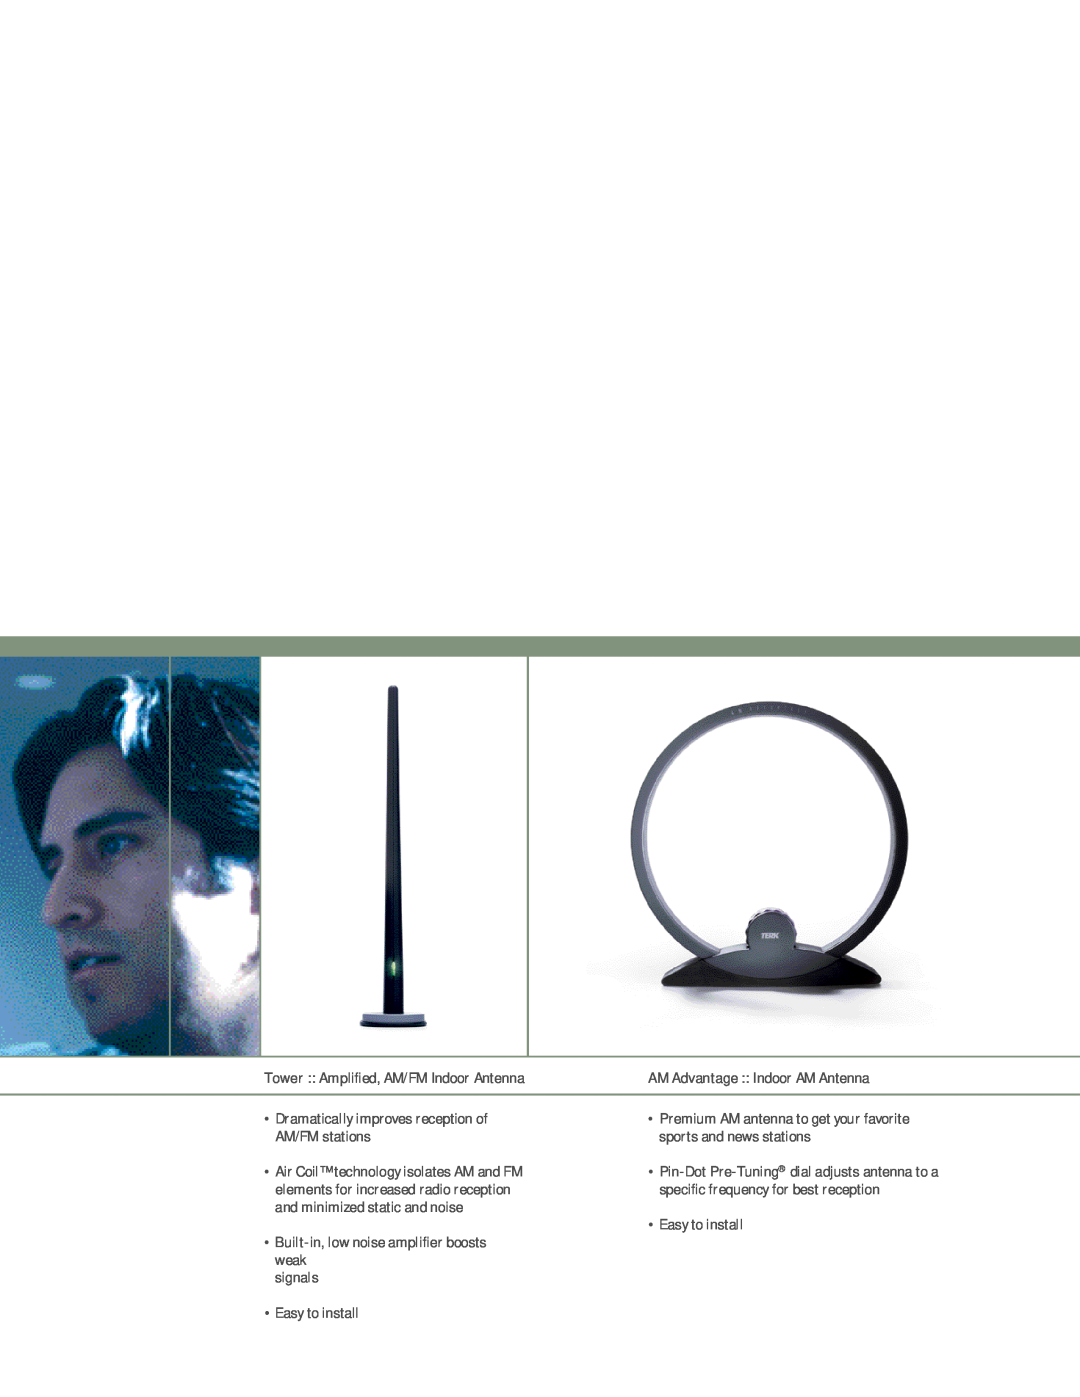 TERK Technologies TOWER manual Tower Amplified, AM/FM Indoor Antenna, AM Advantage Indoor AM Antenna, Easy to install 